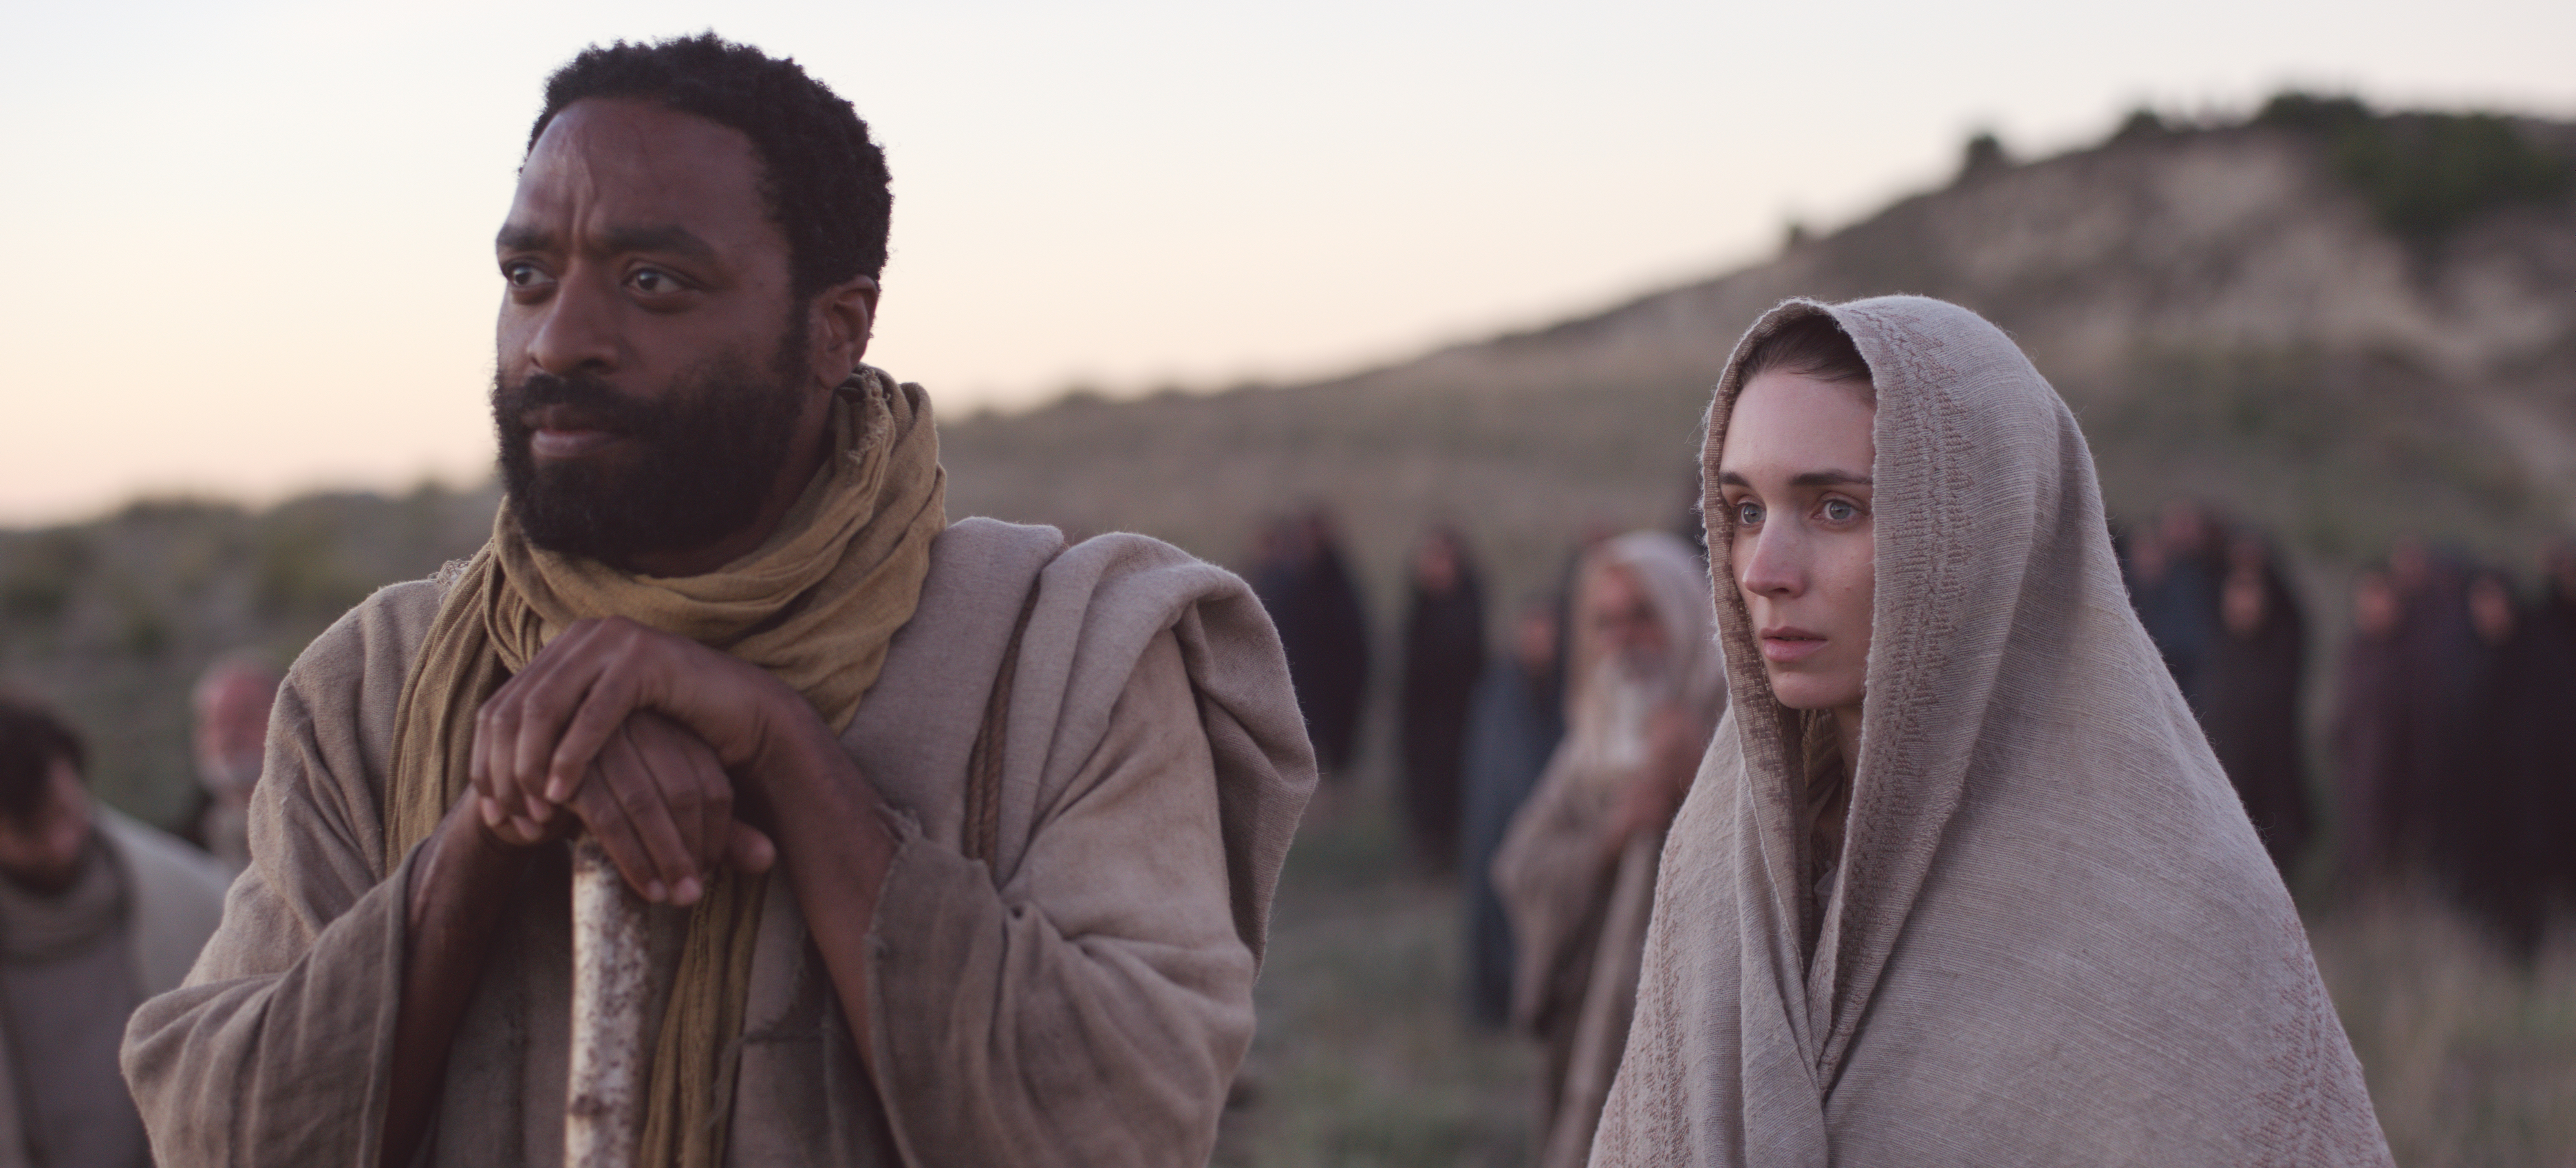 Rooney Mara and Chiwetel Ejiofor in Mary Magdalene.